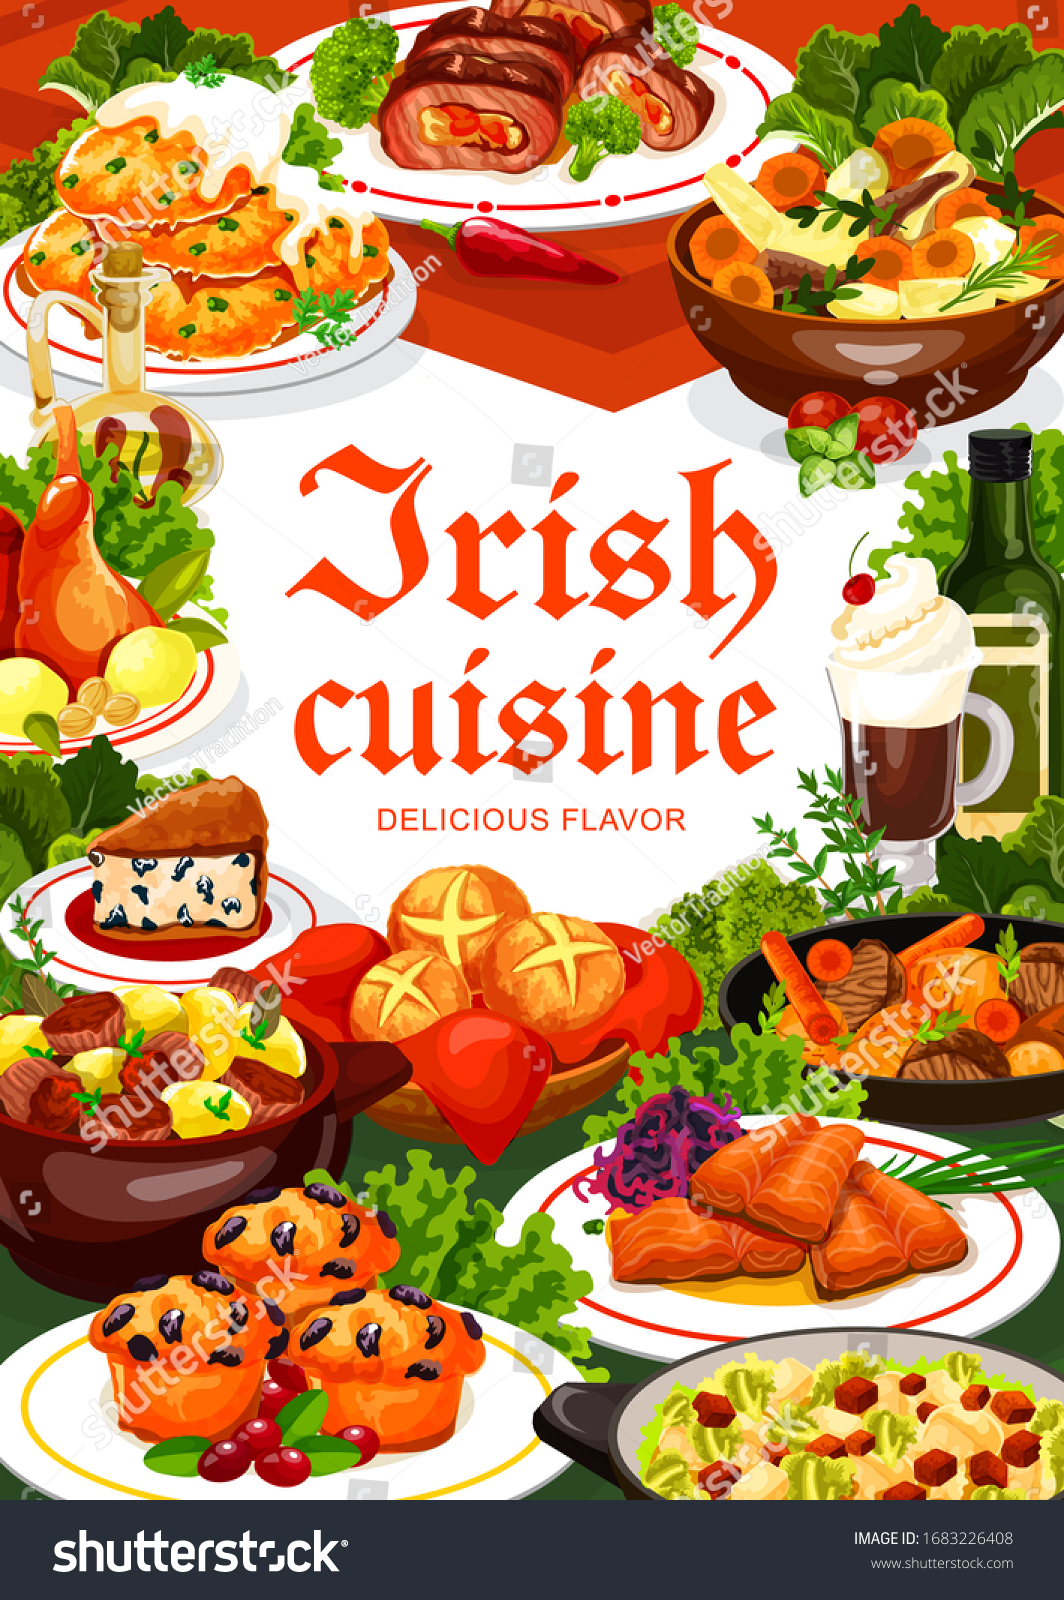 SVG of Irish cuisine meal of vegetable, meat and fish, vector food. Potato pancakes, beef and rabbit stews, grilled salmon with cabbage salad, colcannon, soda bread and lingonberry cupcakes with Irish coffee svg